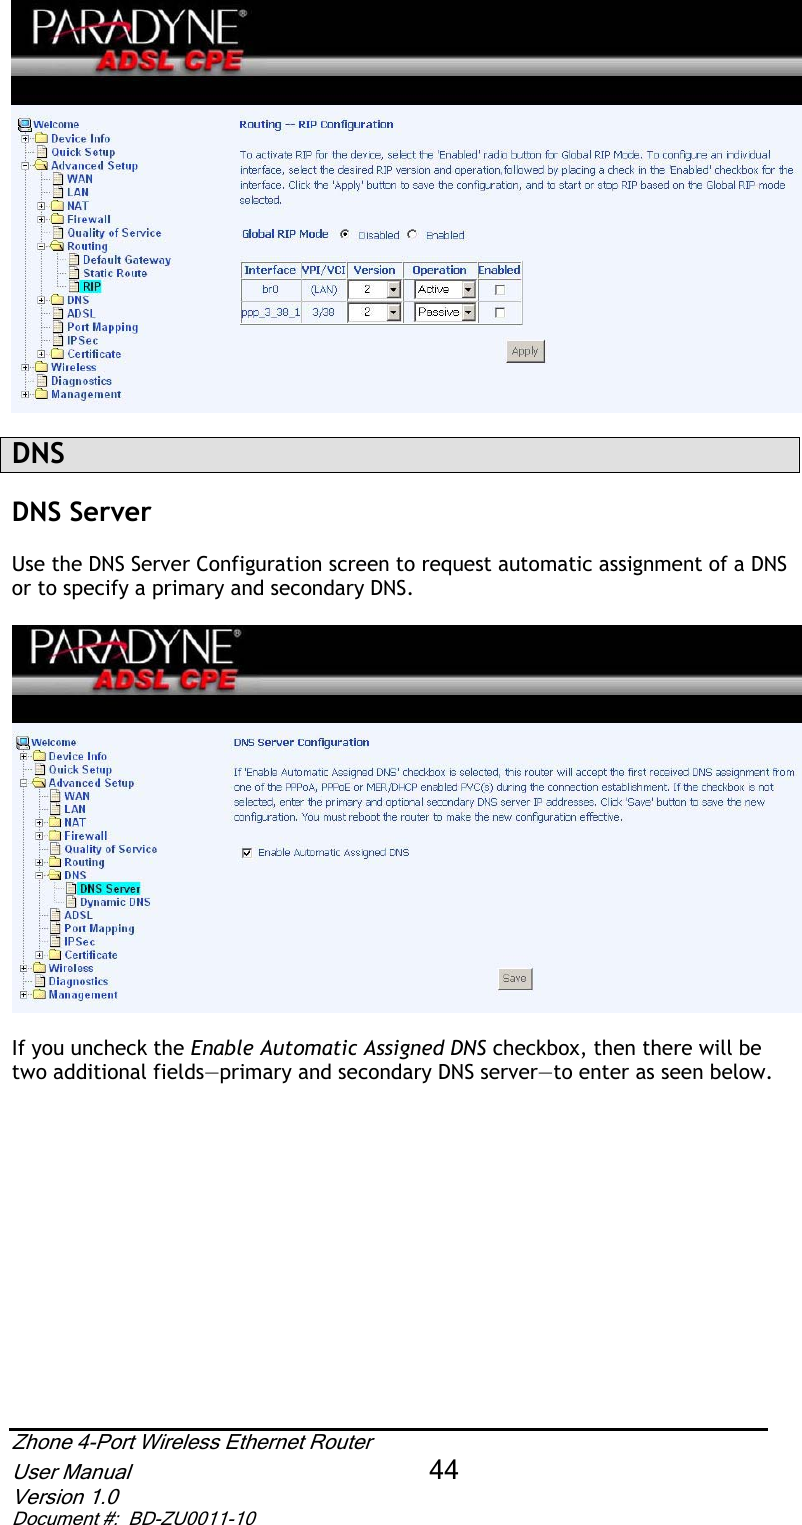 DNSDNS Server Use the DNS Server Configuration screen to request automatic assignment of a DNS or to specify a primary and secondary DNS.  If you uncheck the Enable Automatic Assigned DNS checkbox, then there will be two additional fields—primary and secondary DNS server—to enter as seen below. Zhone 4-Port Wireless Ethernet Router User Manual 44Version 1.0 Document #:  BD-ZU0011-10